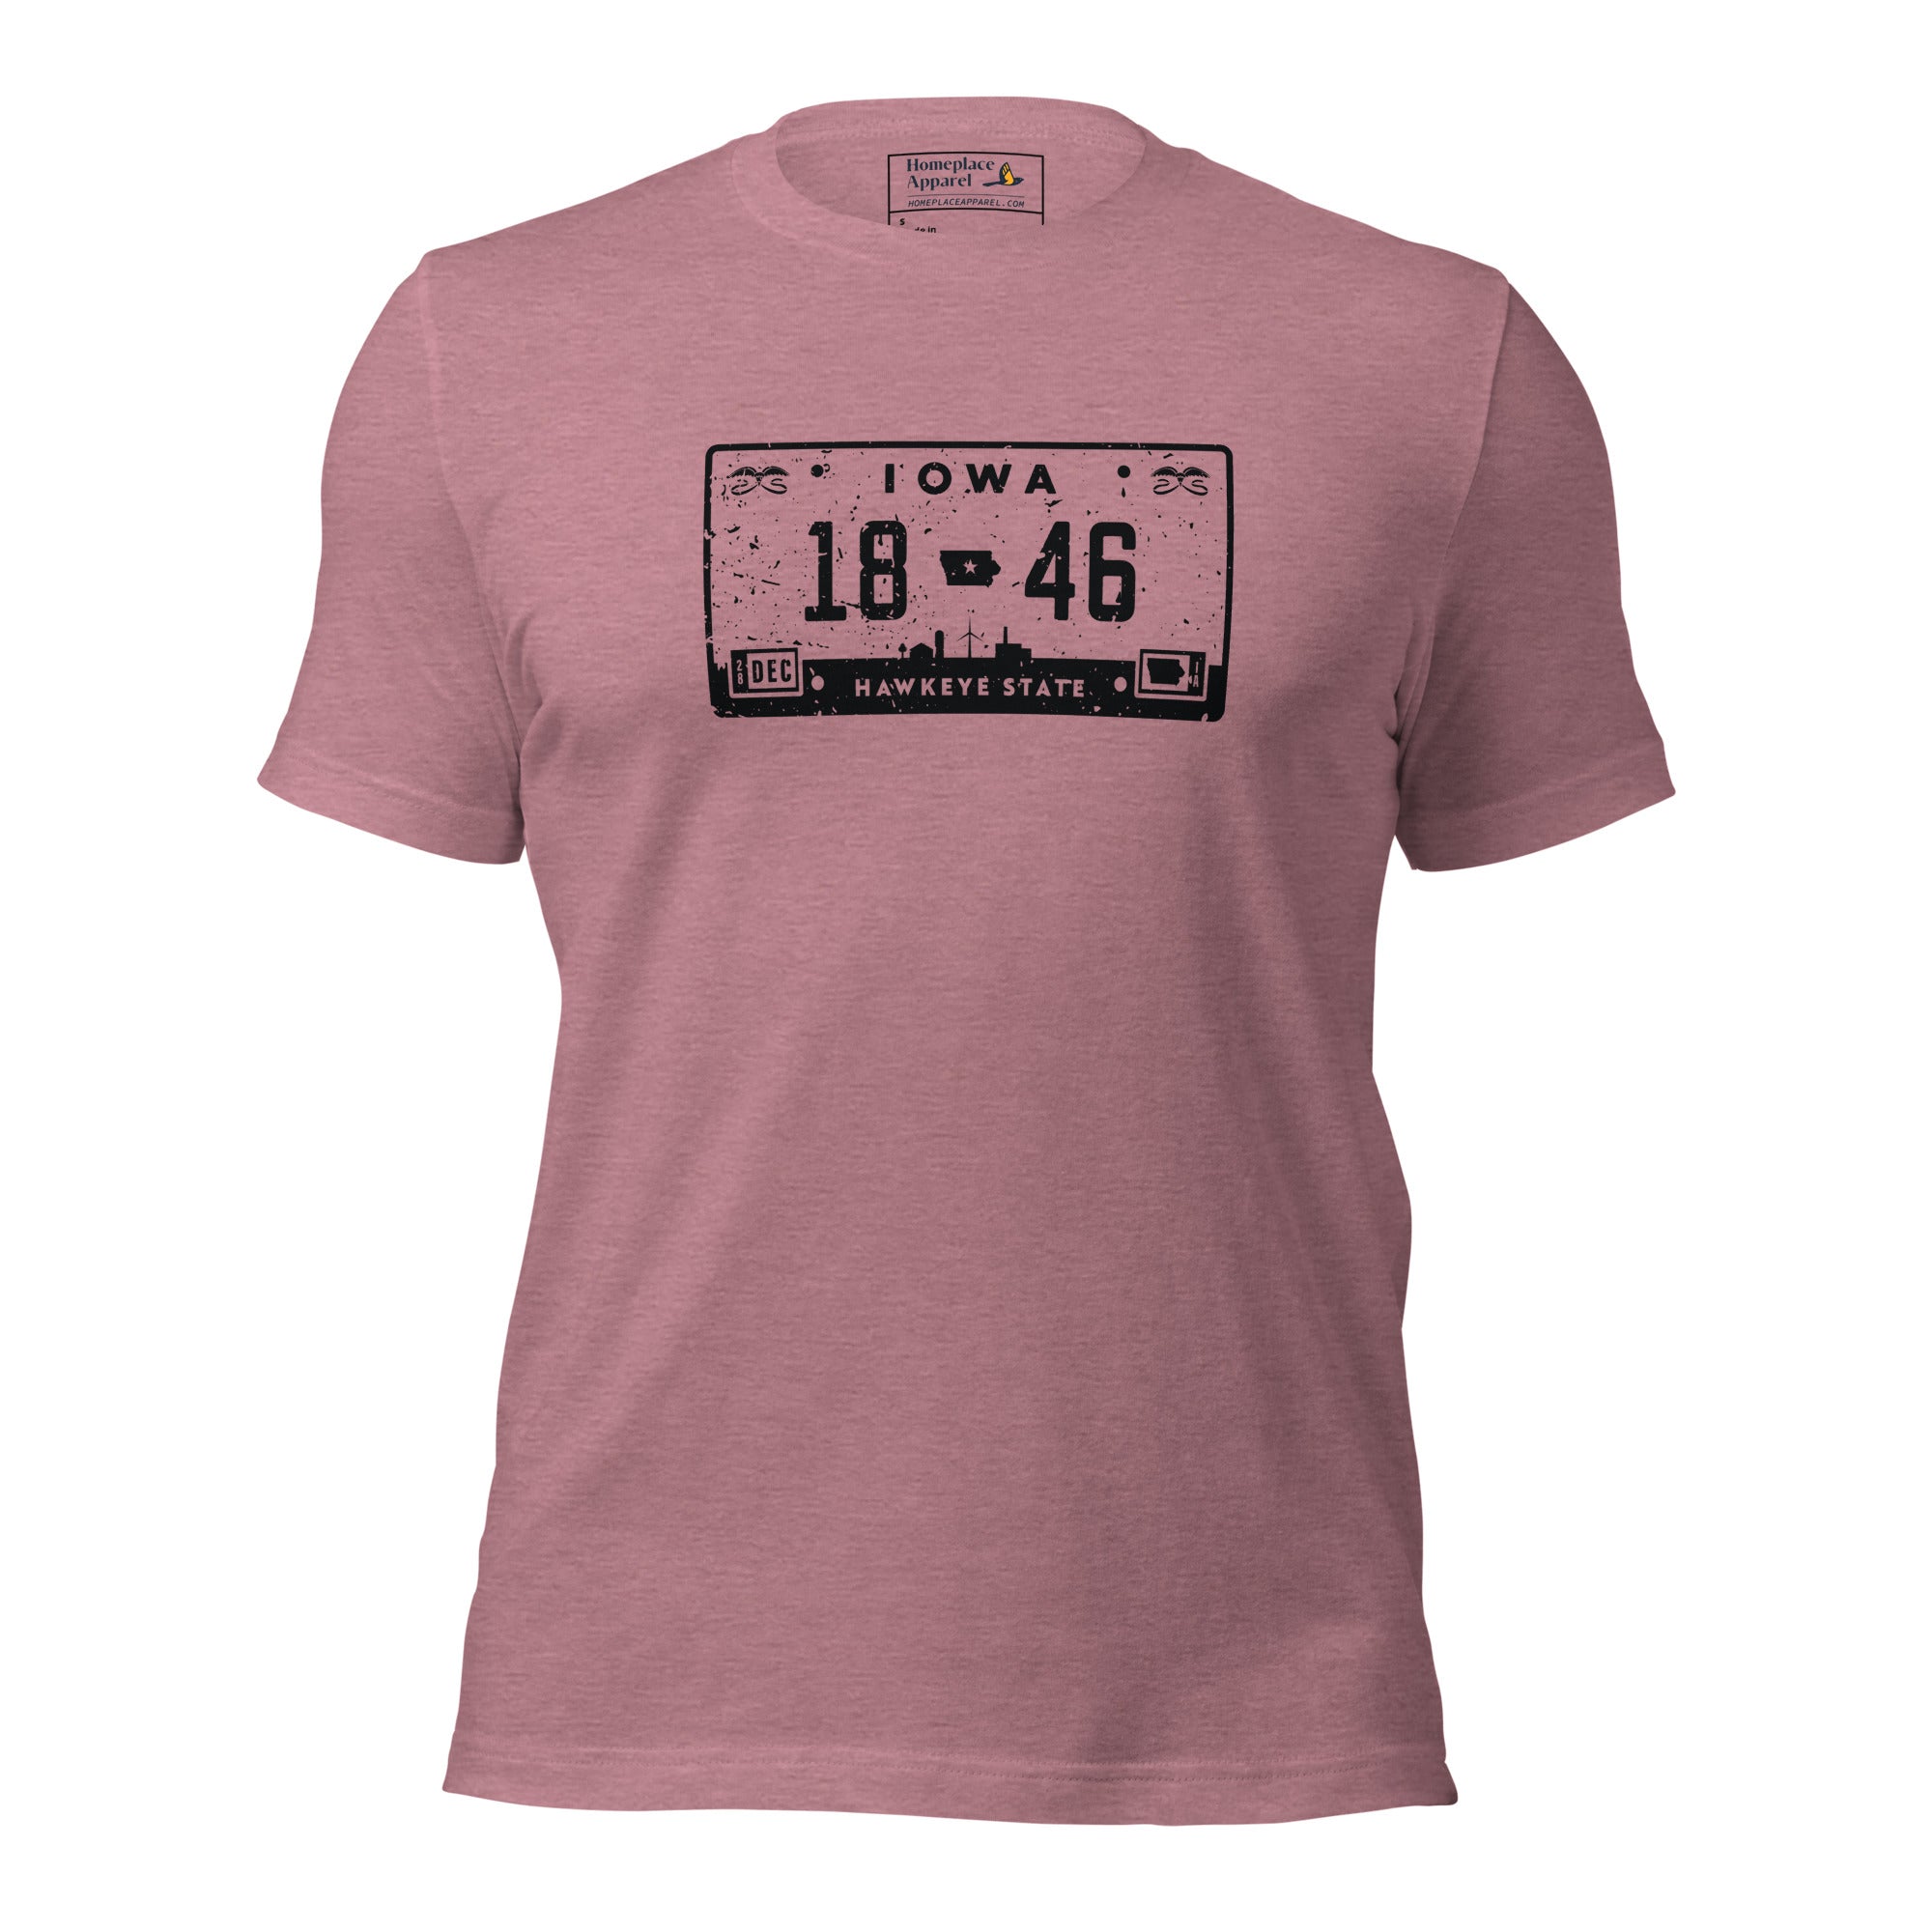 unisex-staple-t-shirt-heather-orchid-front-650323a2cd802.jpg